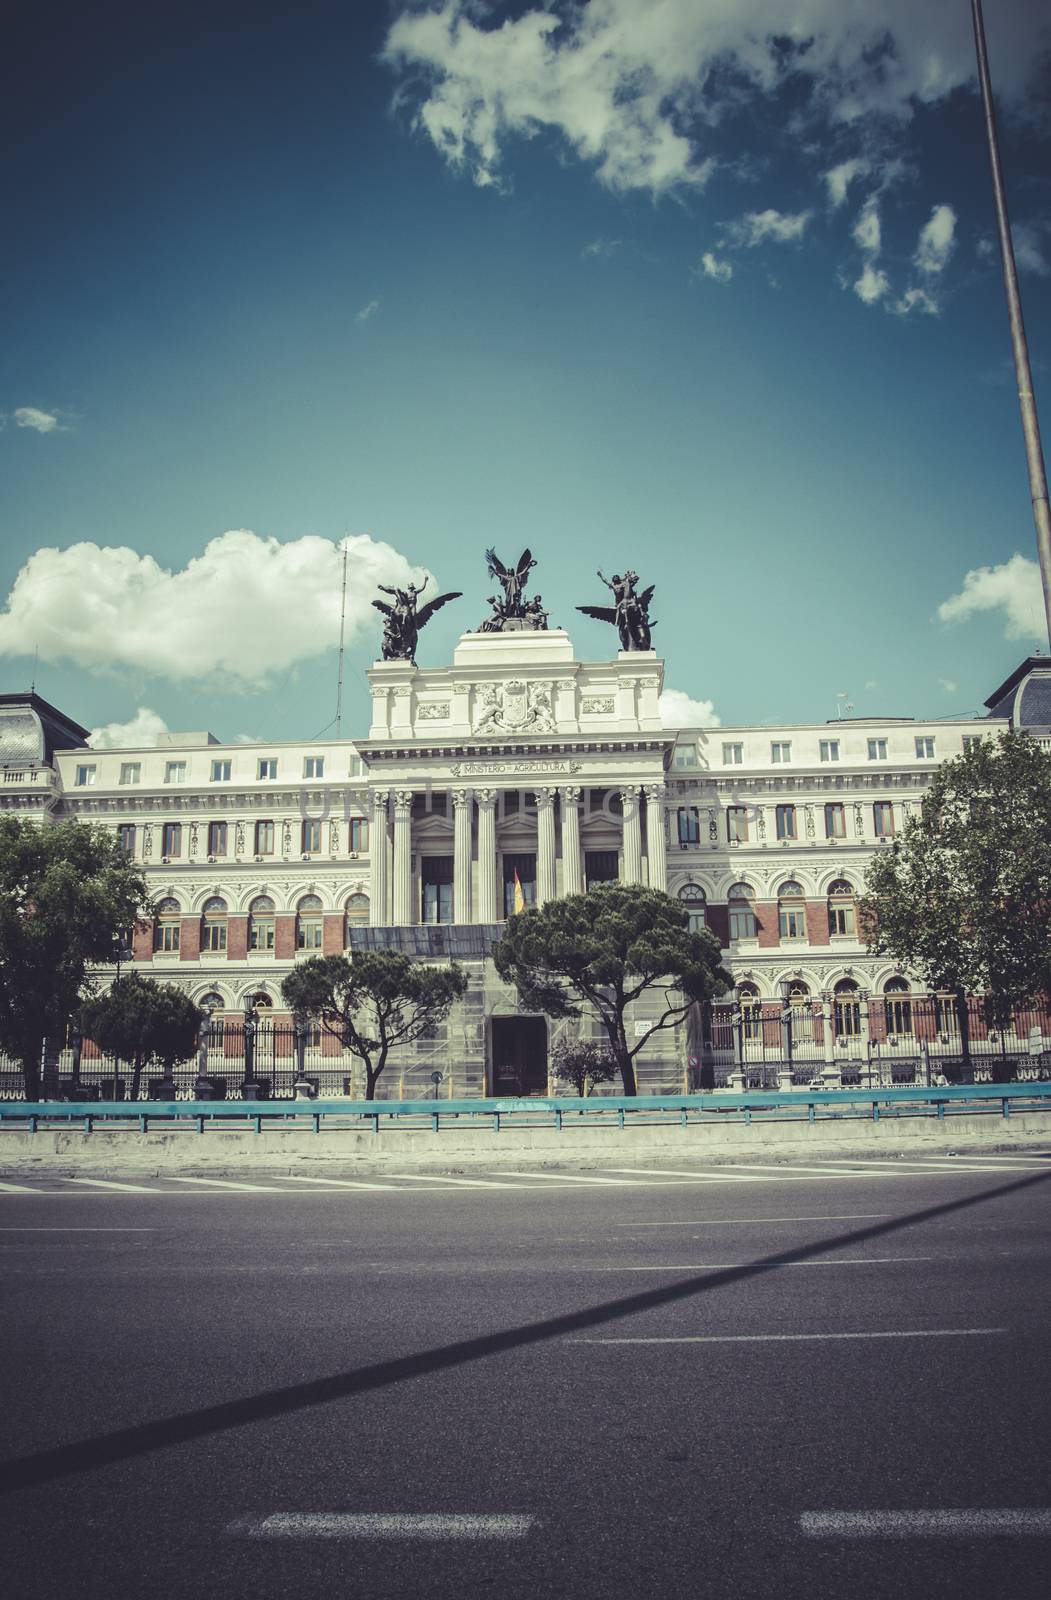 Agriculture ministry Image of the city of Madrid, its characteristic architecture